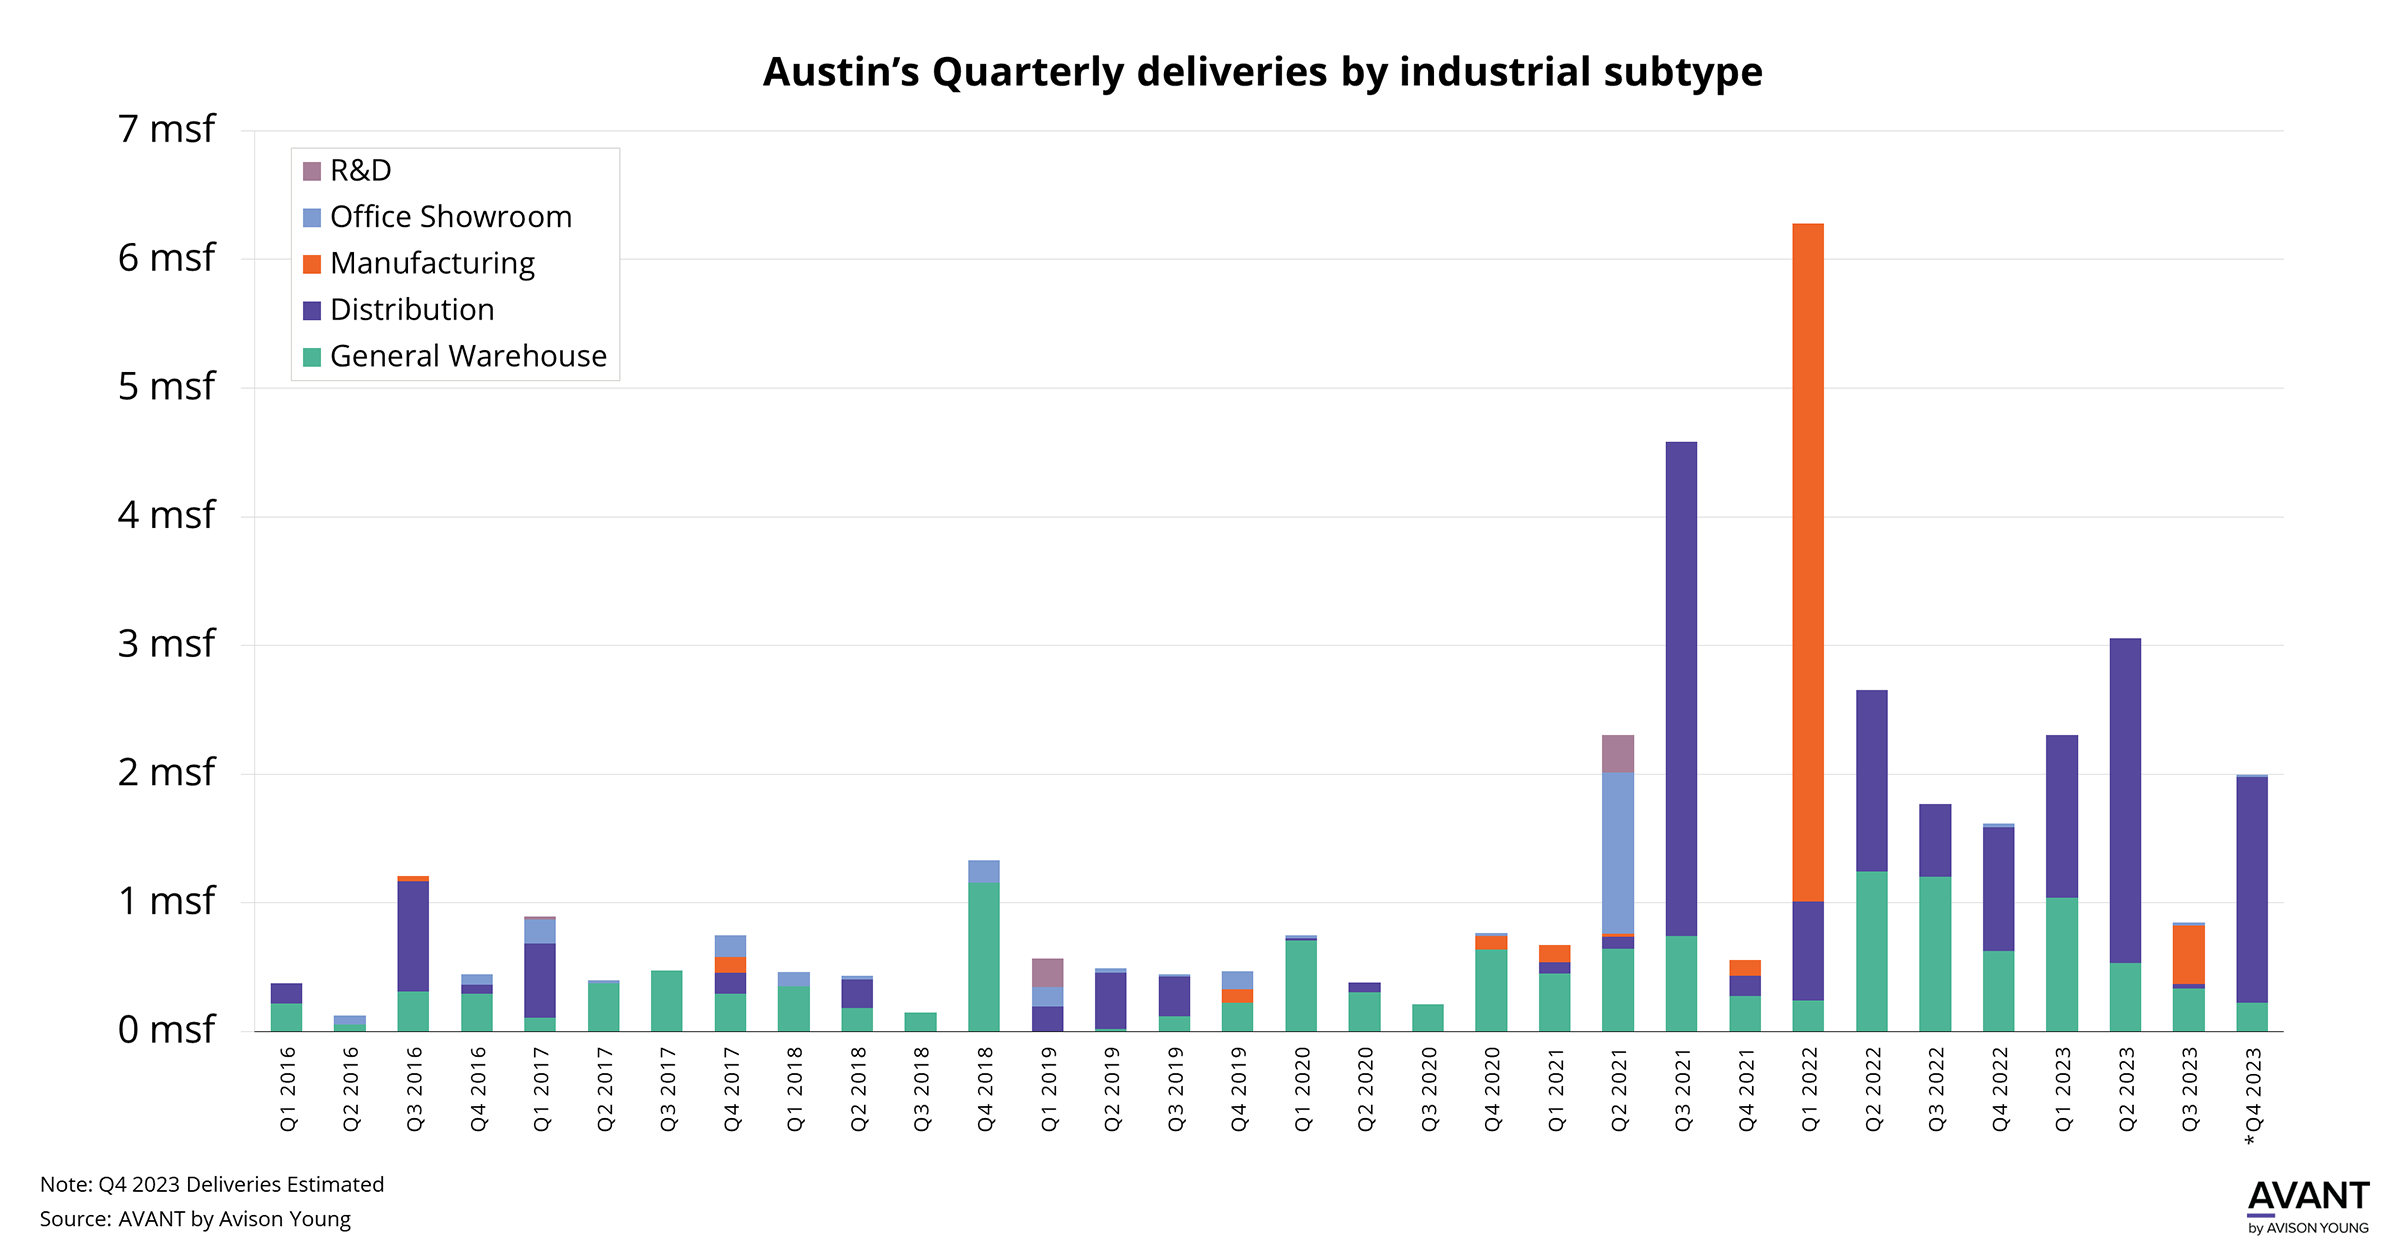 Bar chart of Austin’s Quarterly deliveries by industrial subtype from 2016 to 2023